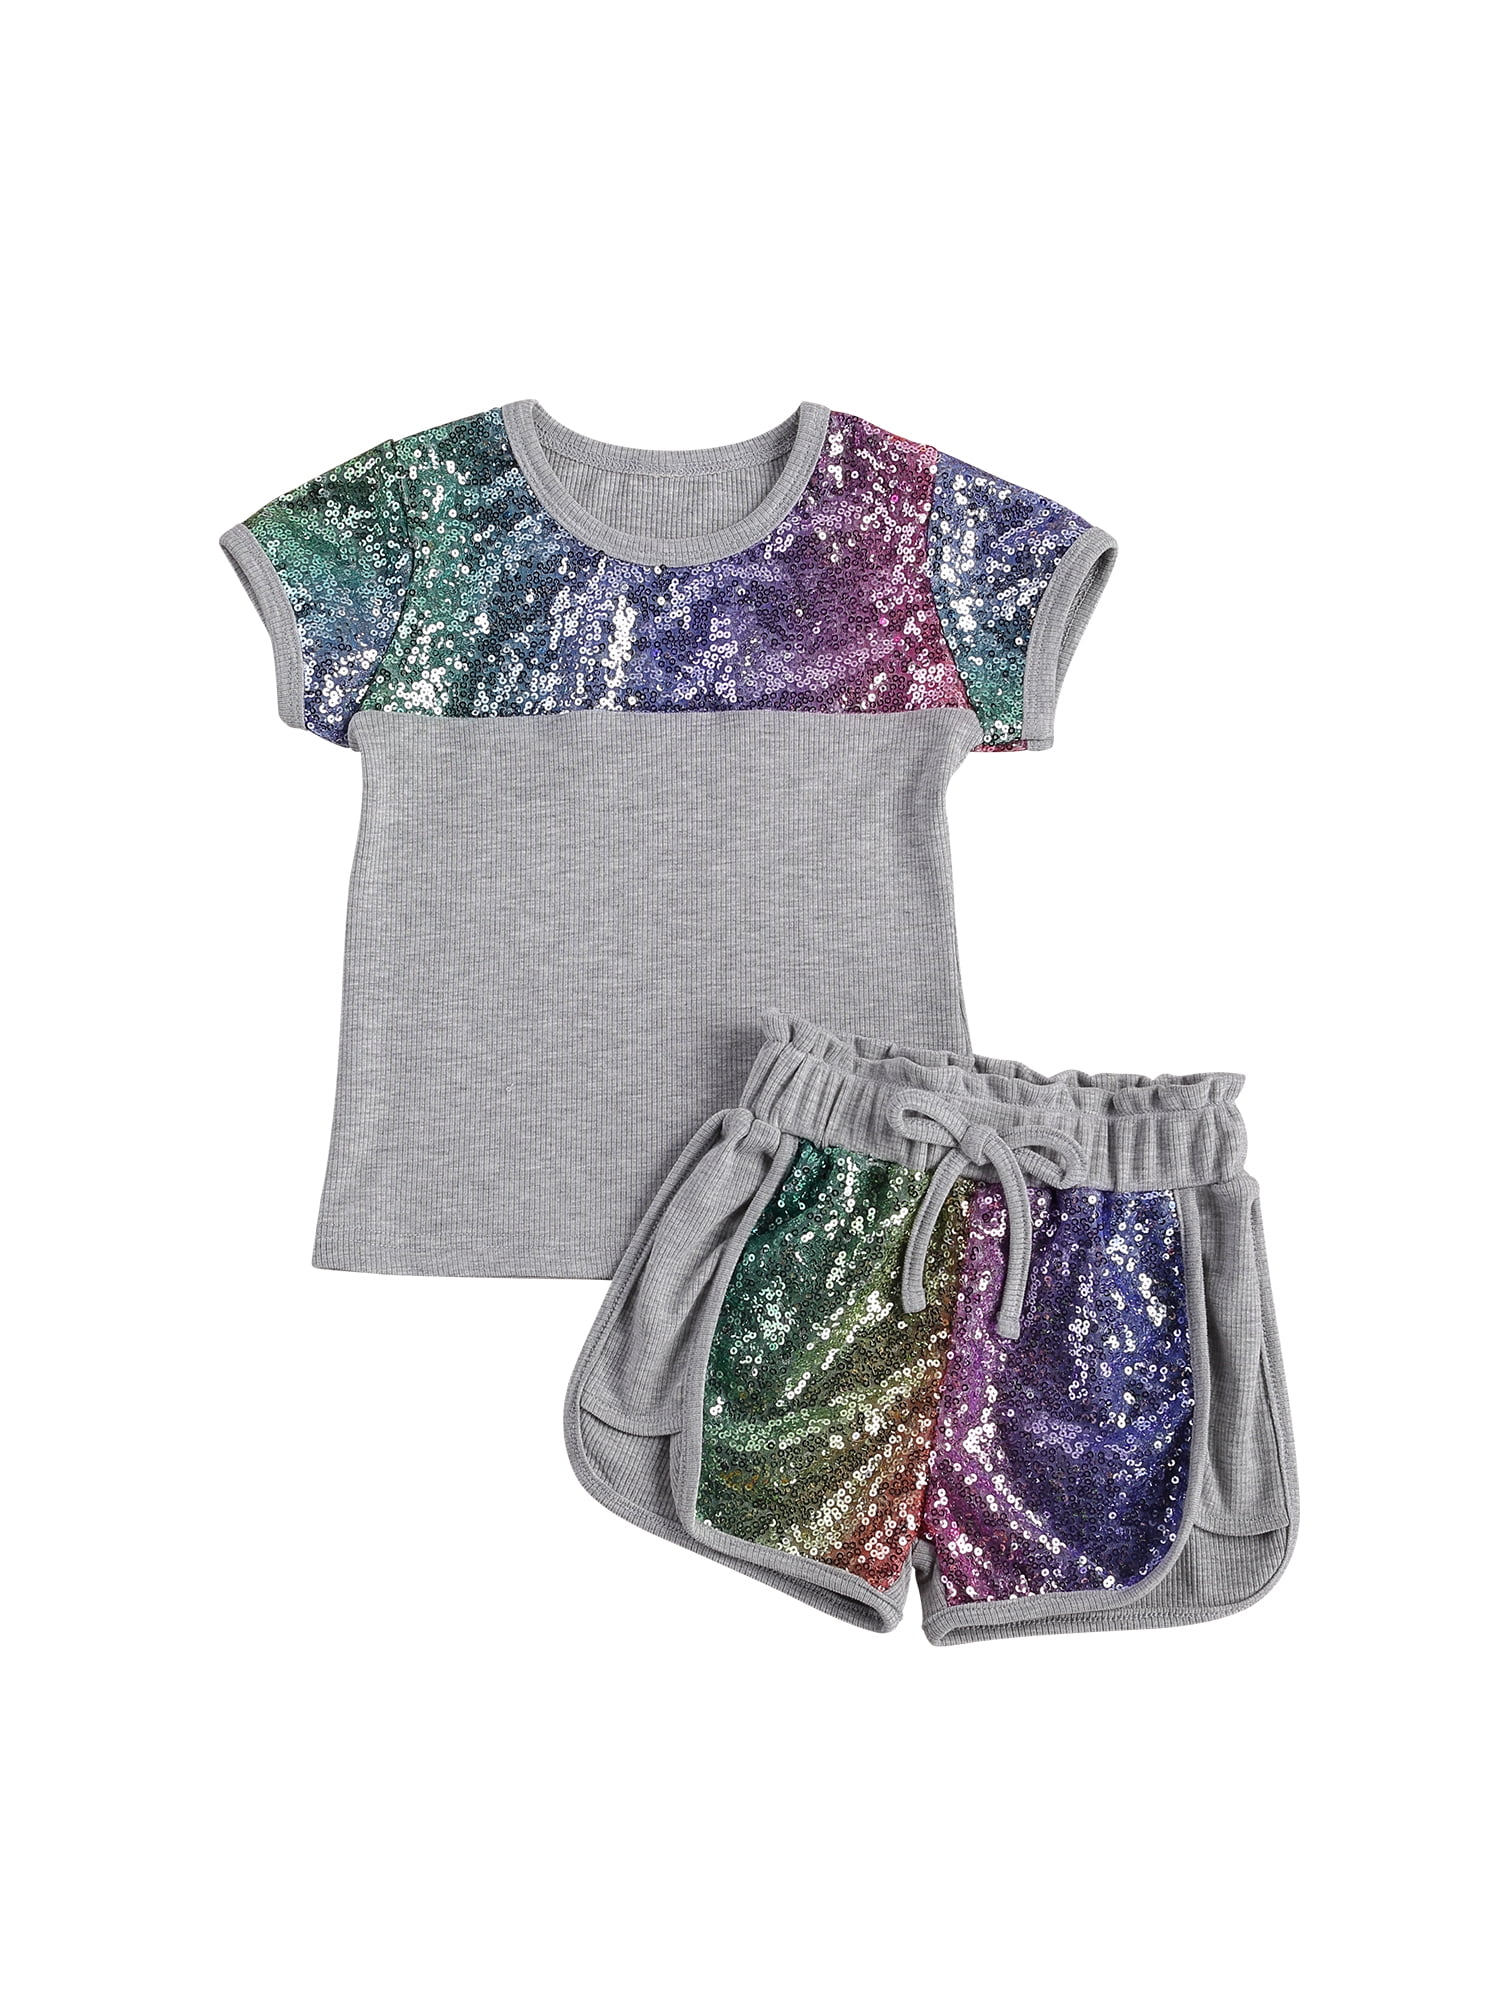 sequins shorts done in all toddler sizes Girls summer shorts set